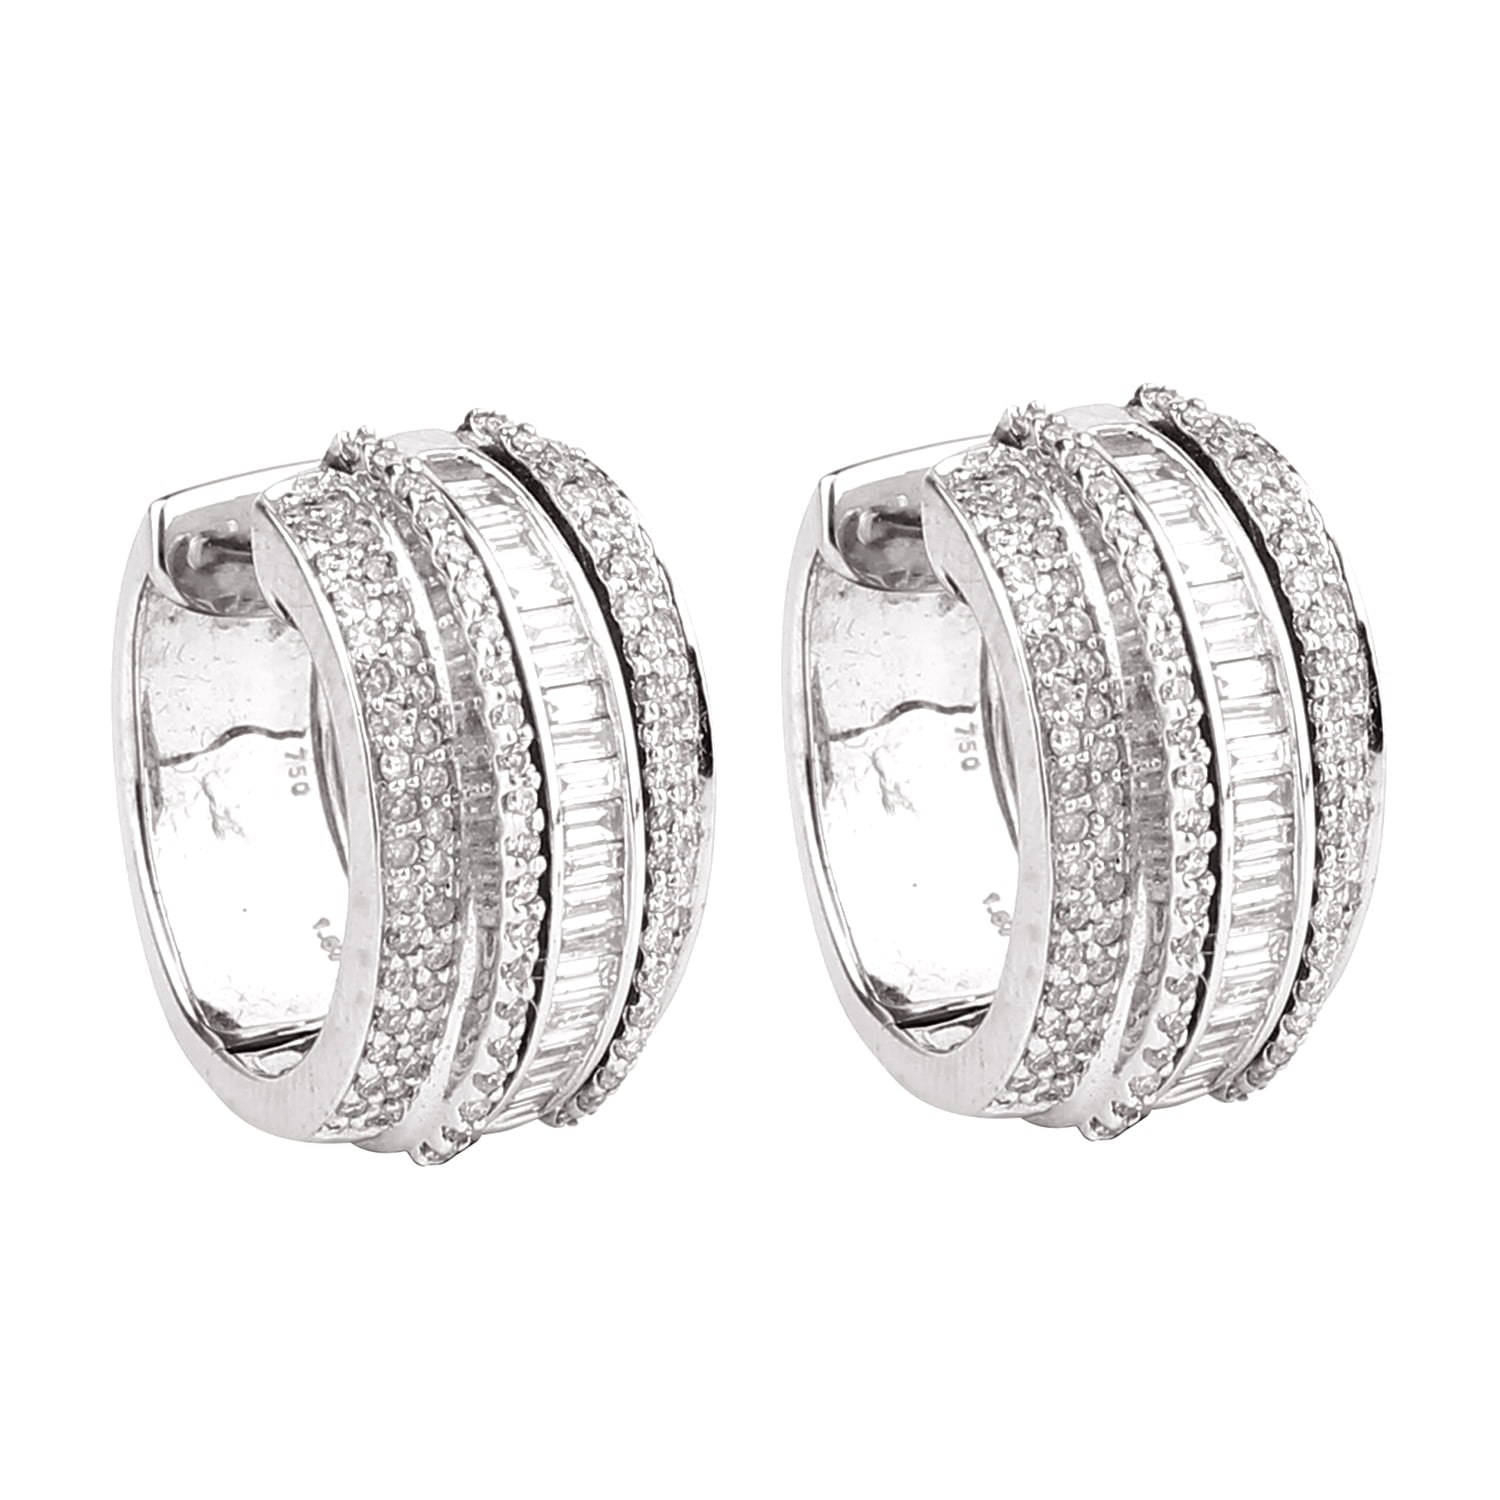 Details about   10K White Gold AAA Graded Cubic Zirconia 4mm Cushion Match Real Band Ring Sets 